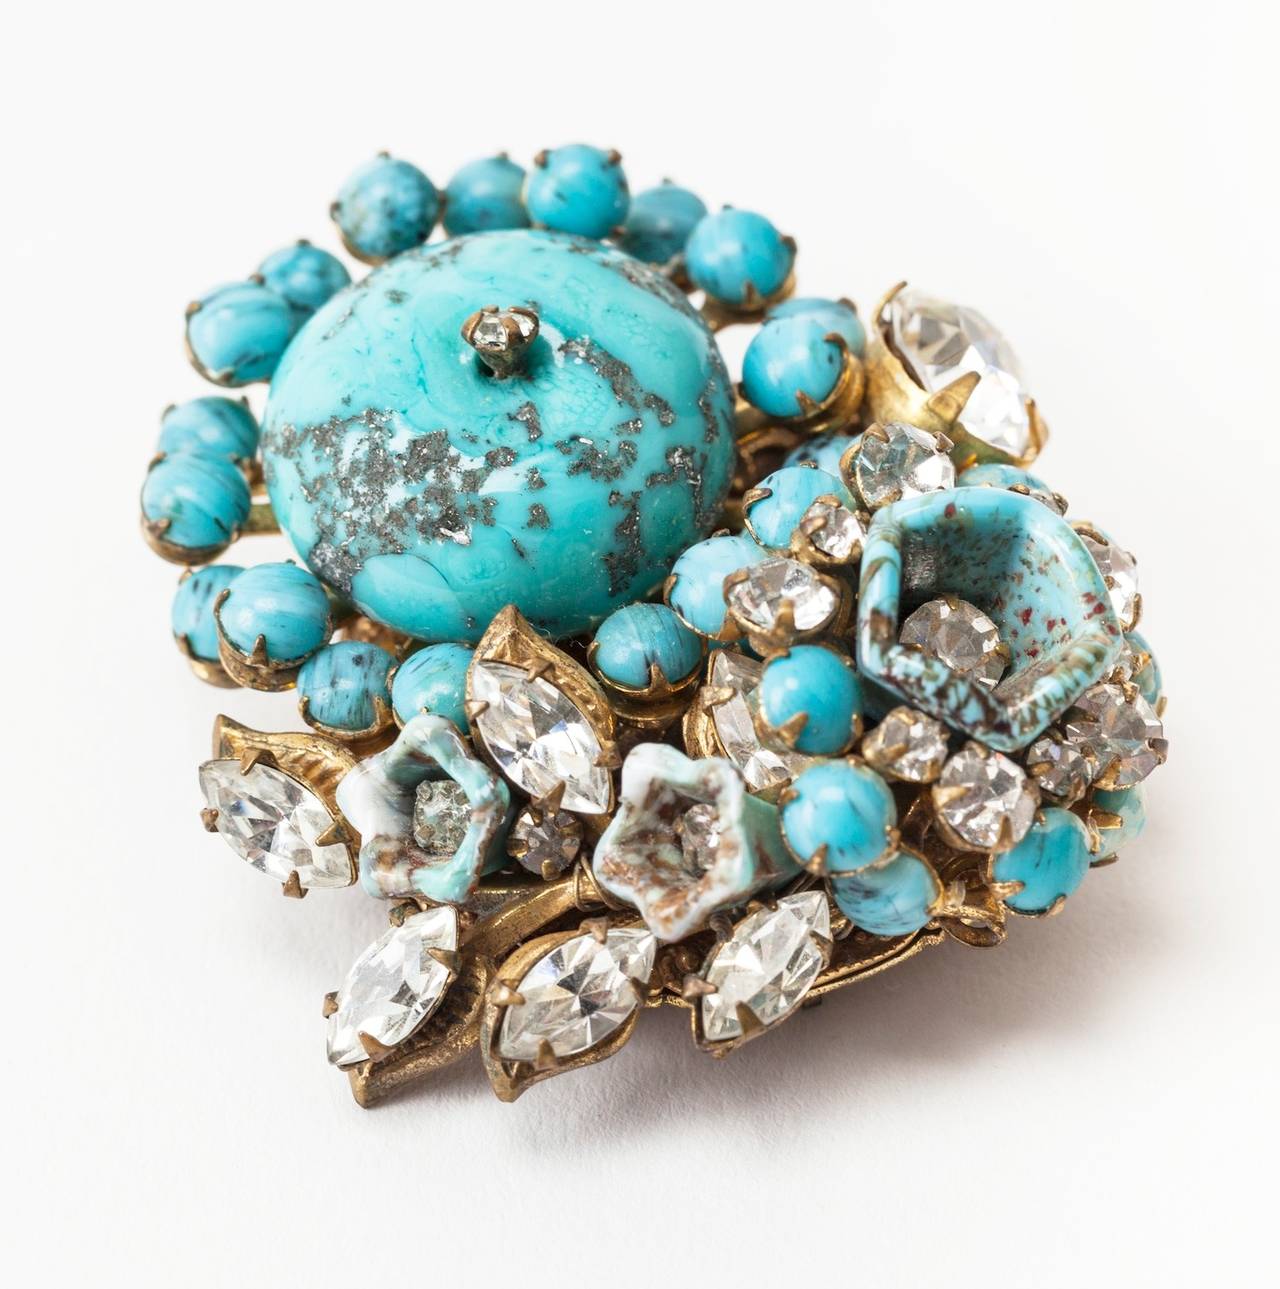 Miriam Haskell hand made brooch of faux matrix turquoise and crystal diamante, set on signature Russian Gilt filigree base. 1950's USA.
Excellent condition.